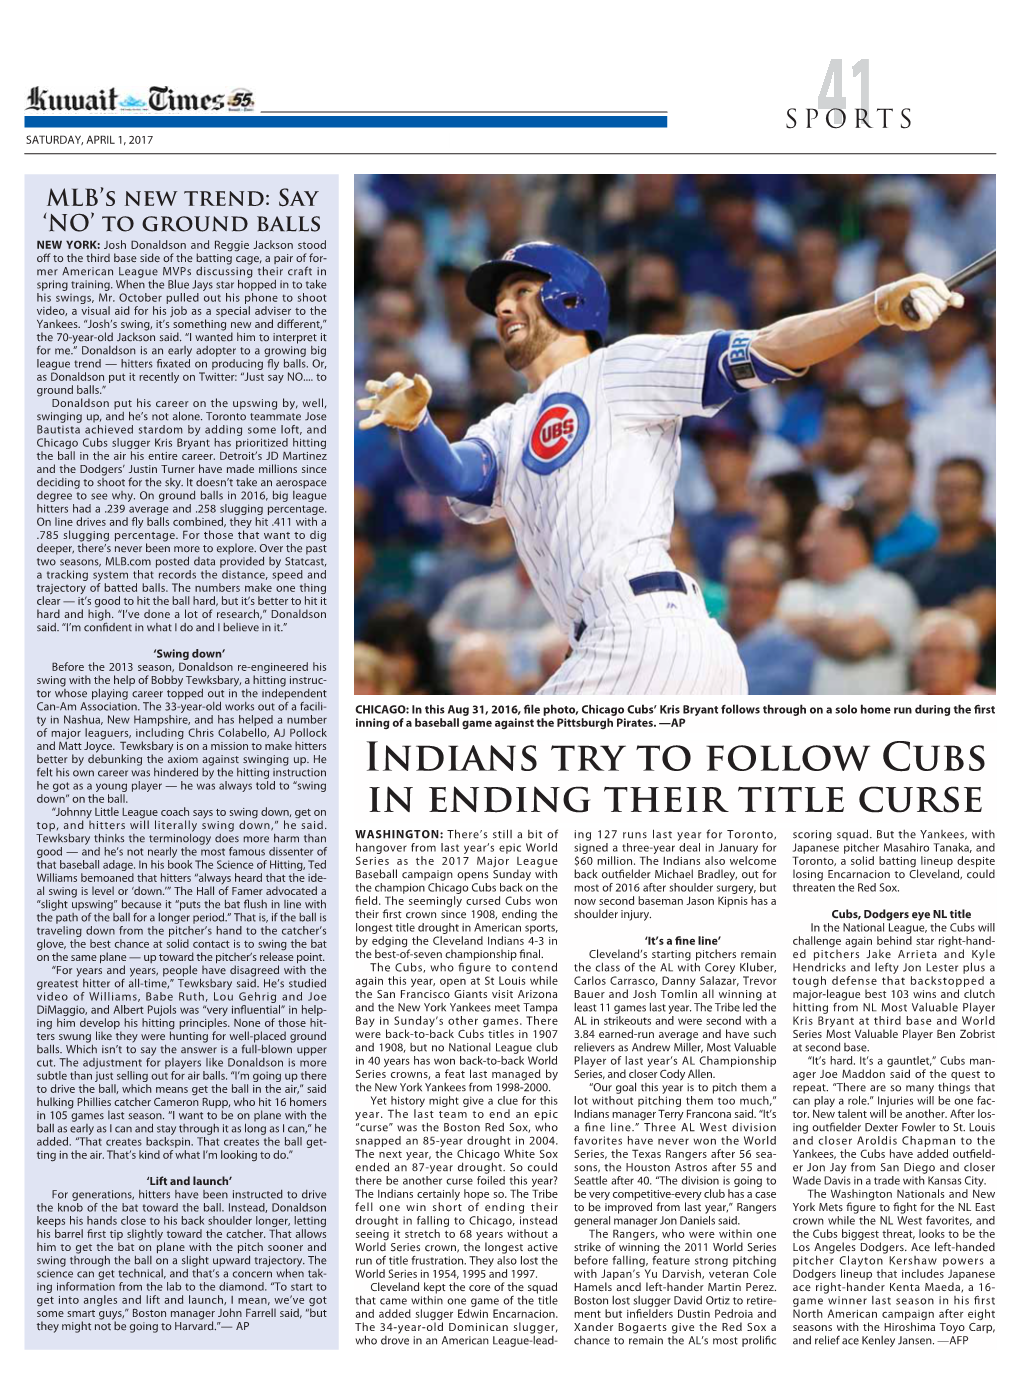 Indians Try to Follow Cubs in Ending Their Title Curse